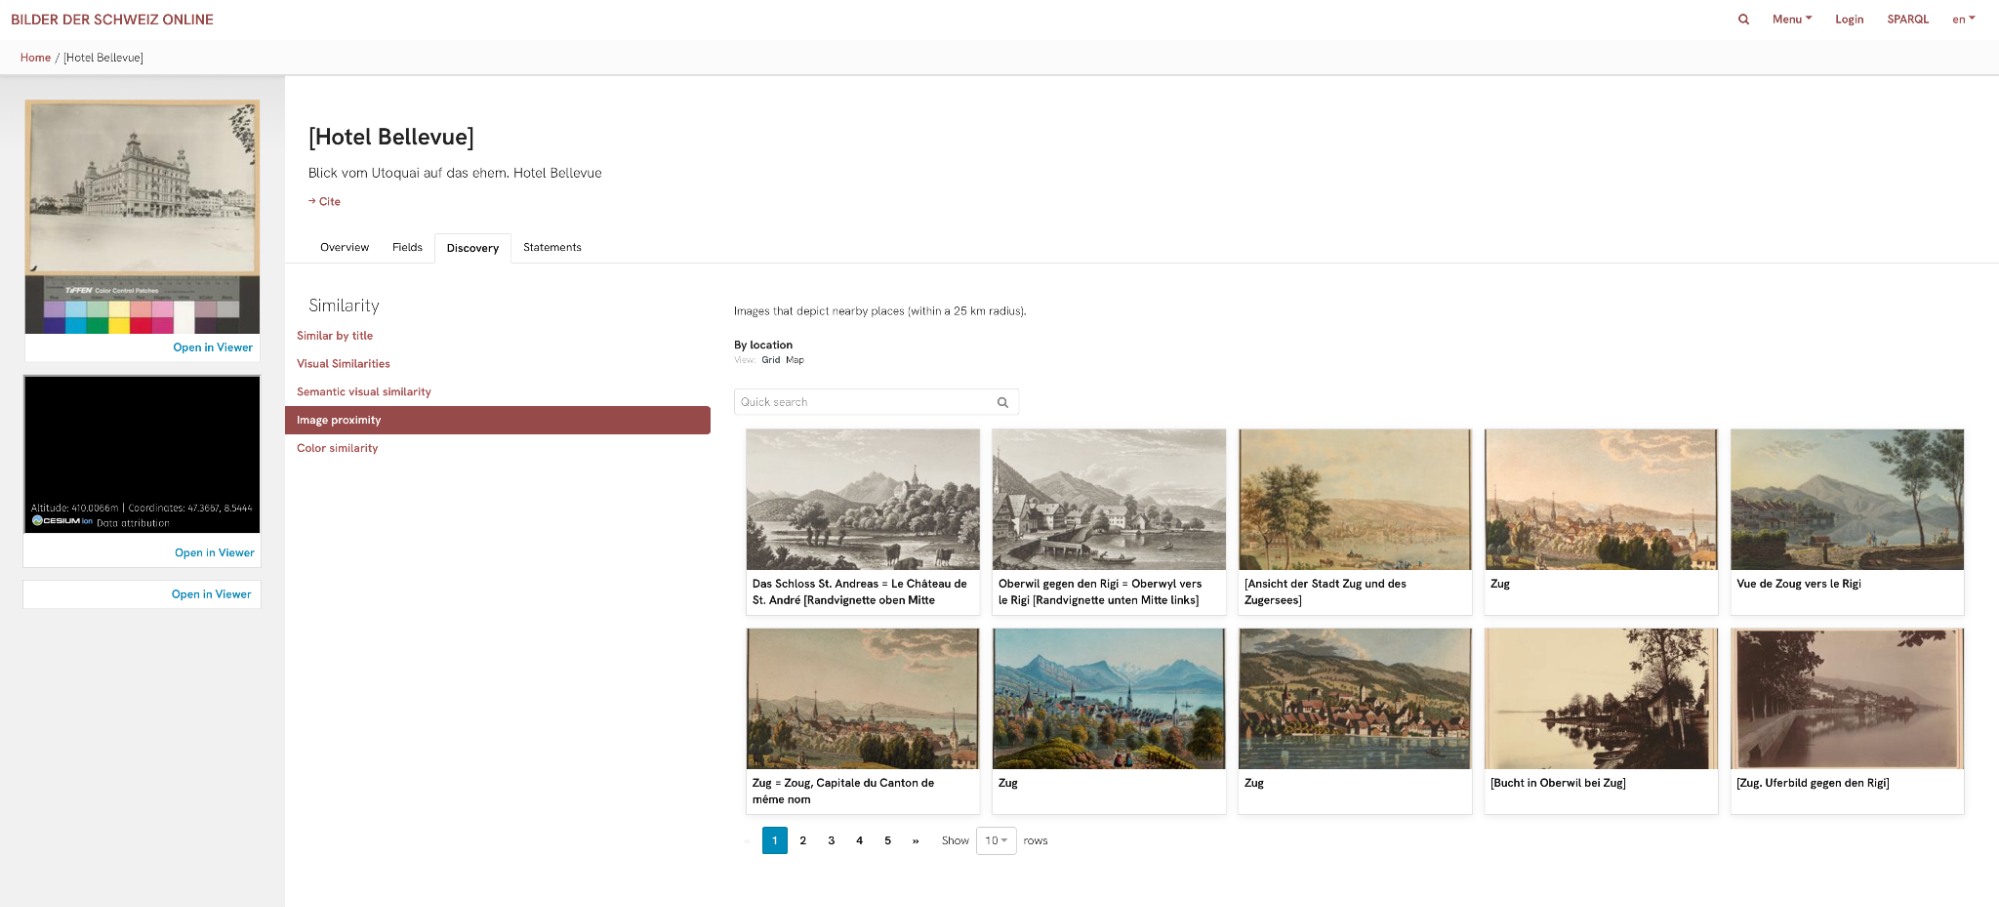 Fig.1: Screenshot of Bilder der Schweiz Online Research Platform where we can search for  images that are geographically close to where the drawing of Hotel Bellevue was taken.